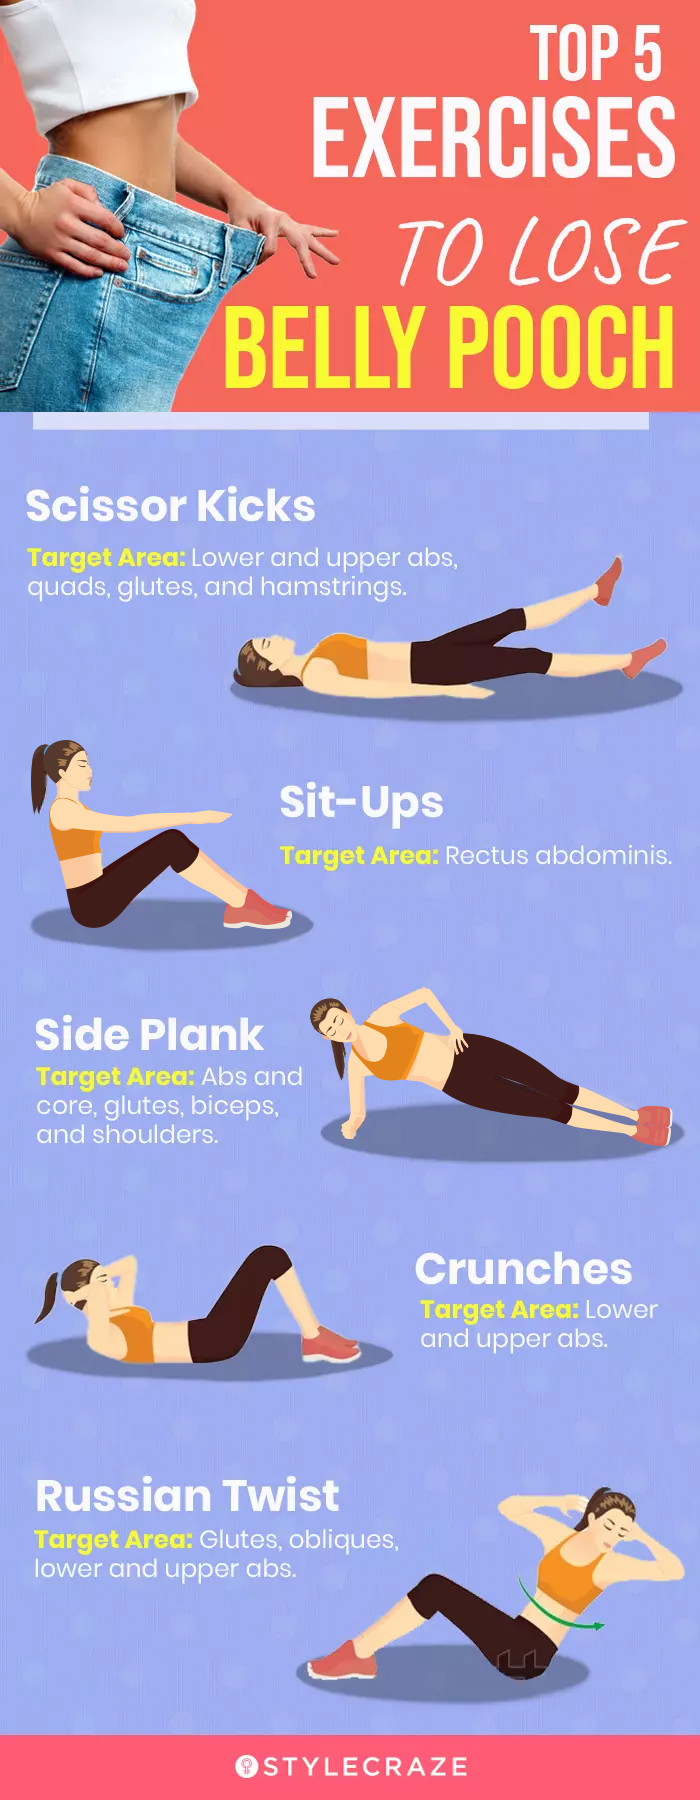 top 5 exercises to lose belly pooch (infographic)